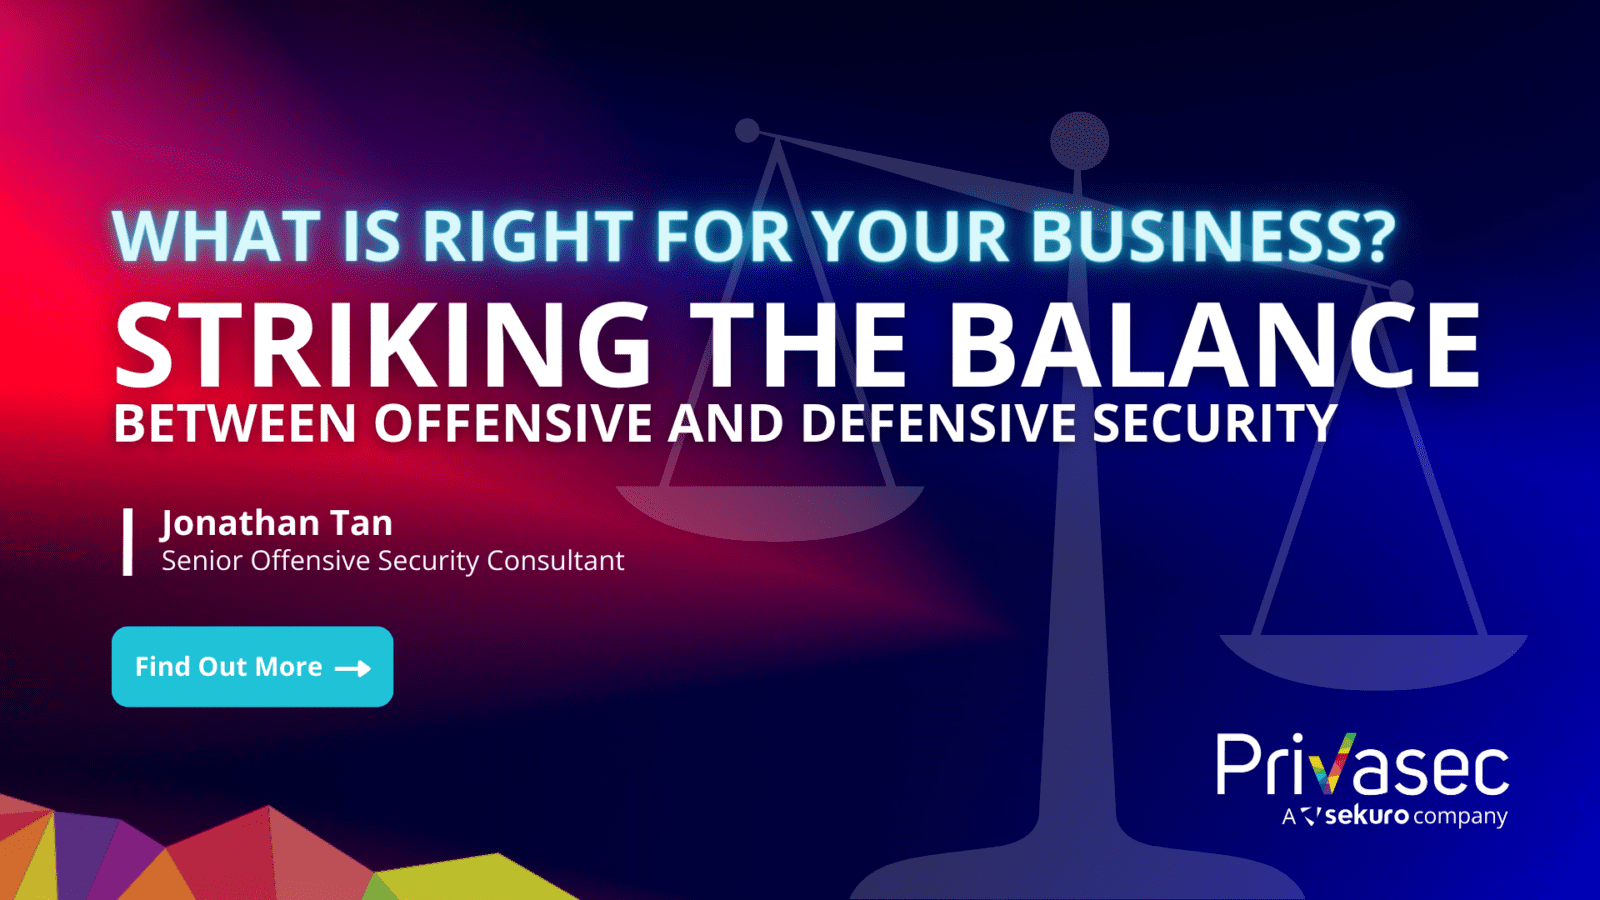 Offensive vs Defensive: What Is Right for Your Business